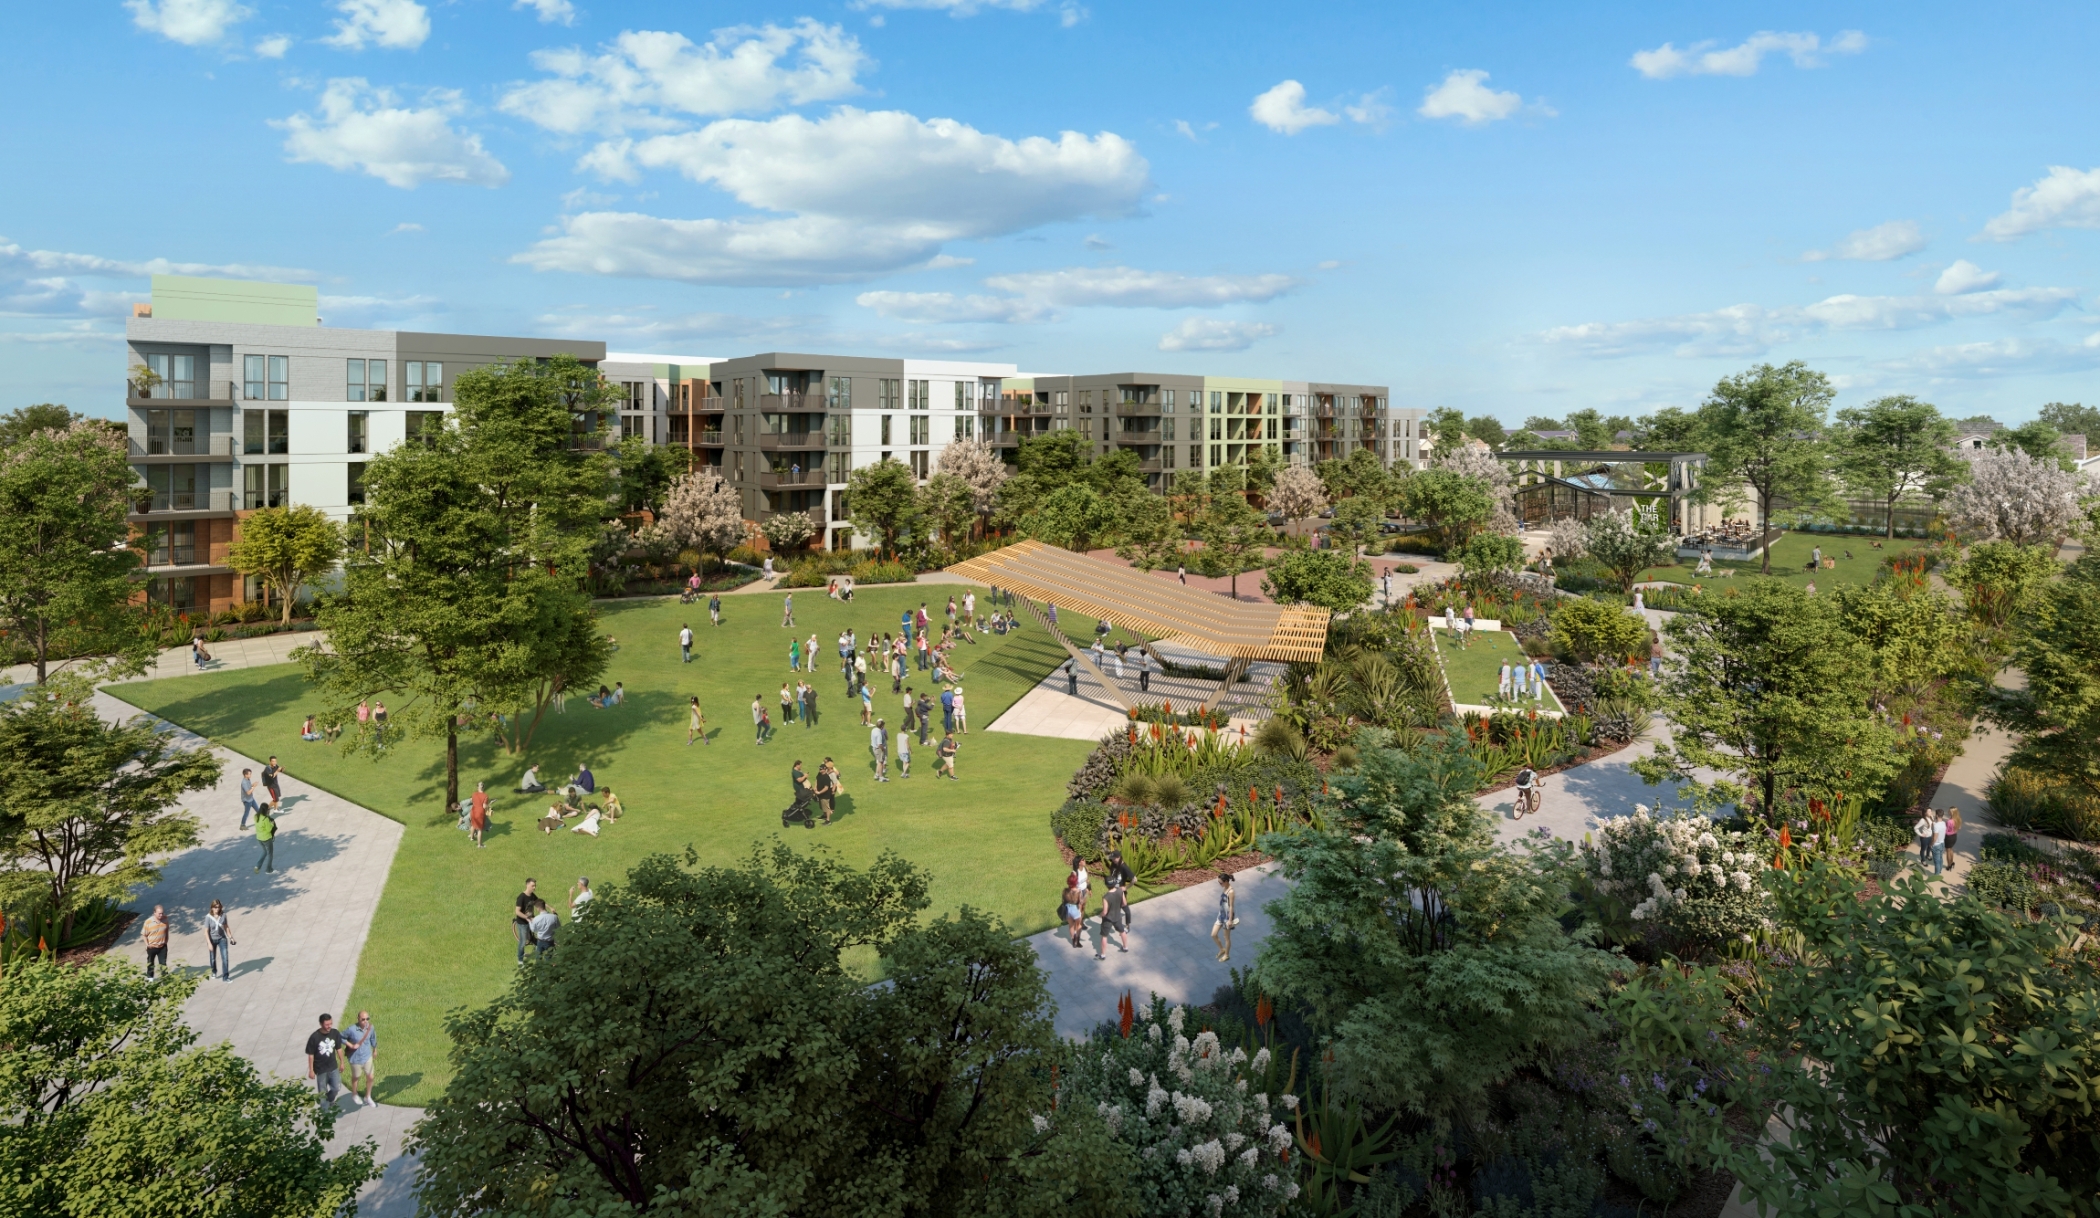 Shopoff Realty Investments is planning to redevelop a portion of the aging Westminster Mall in California's Orange County with new elements including apartments, for-sale townhouses and public gathering spaces. (Shopoff Realty Investments/AO Architecture)